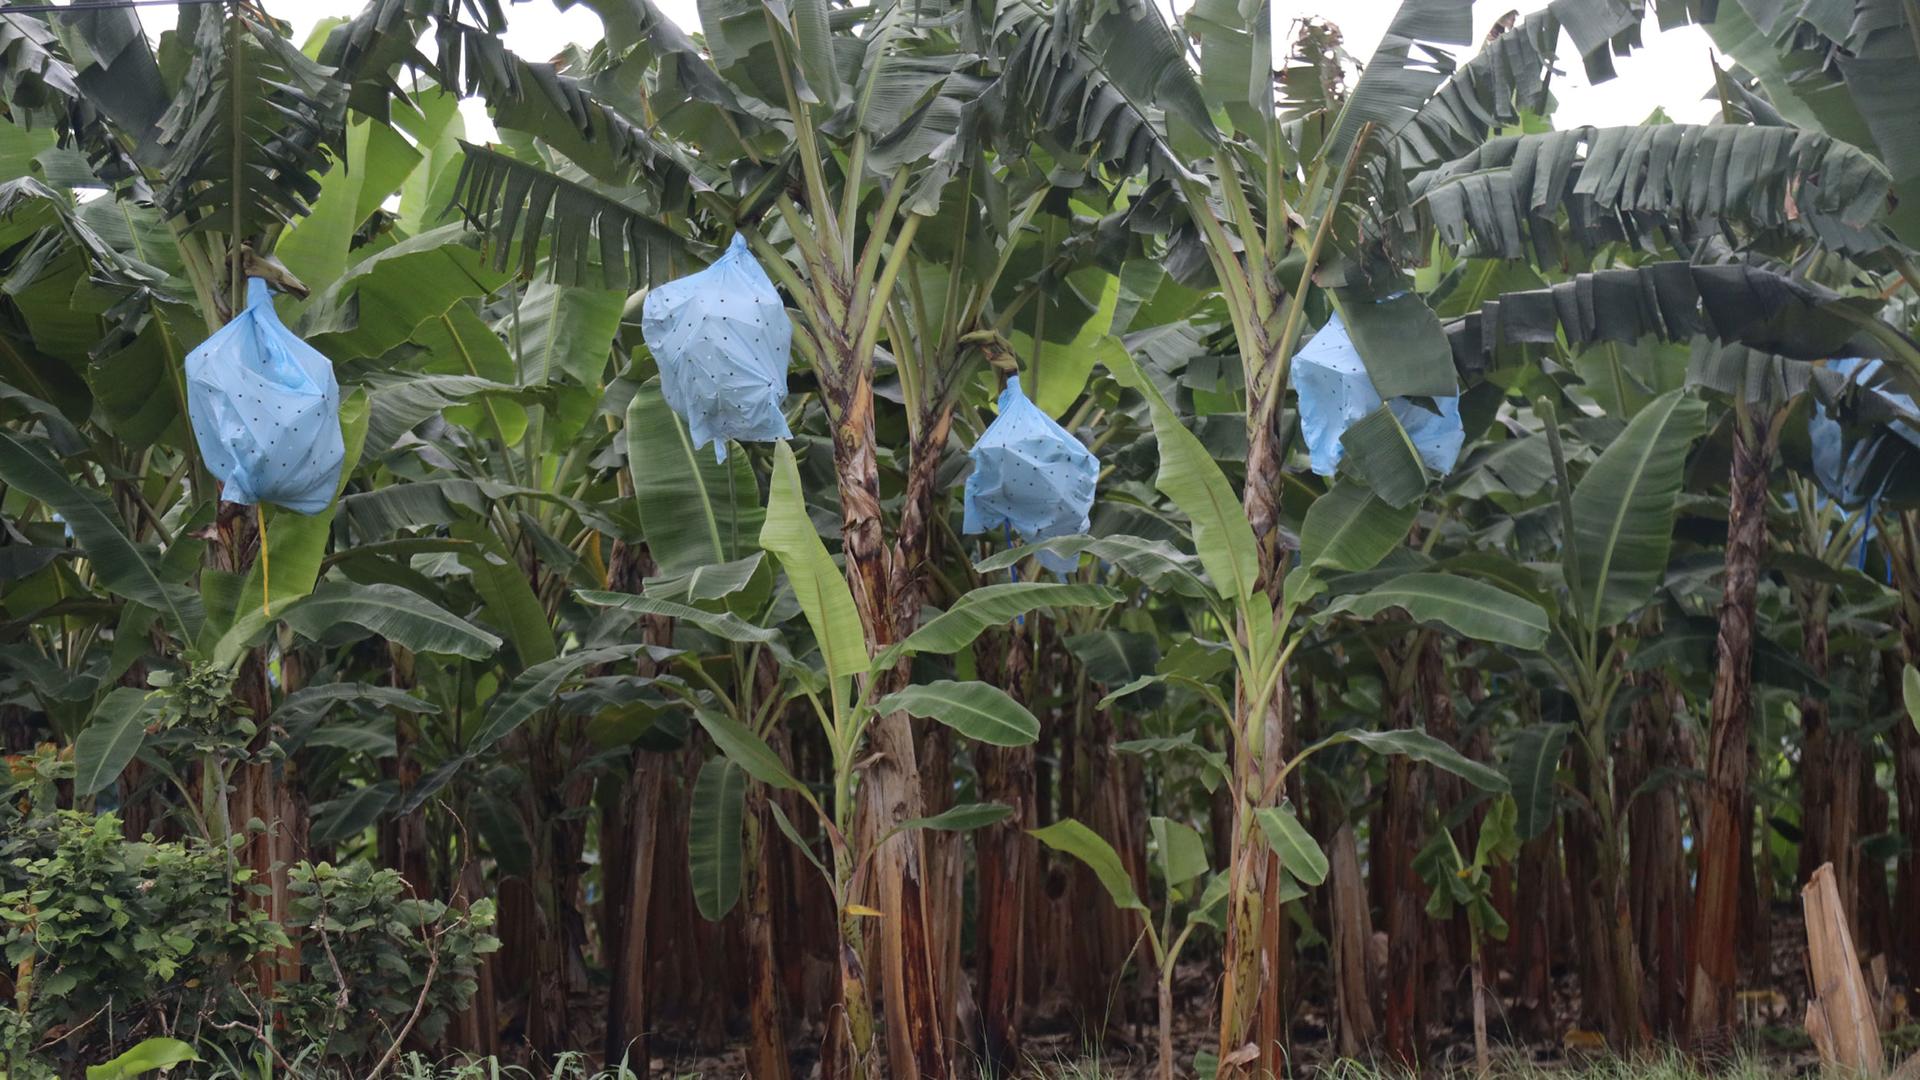 Polyethylene bags are used to protect bananas from pests and blight on a plantation in Costa Rica.